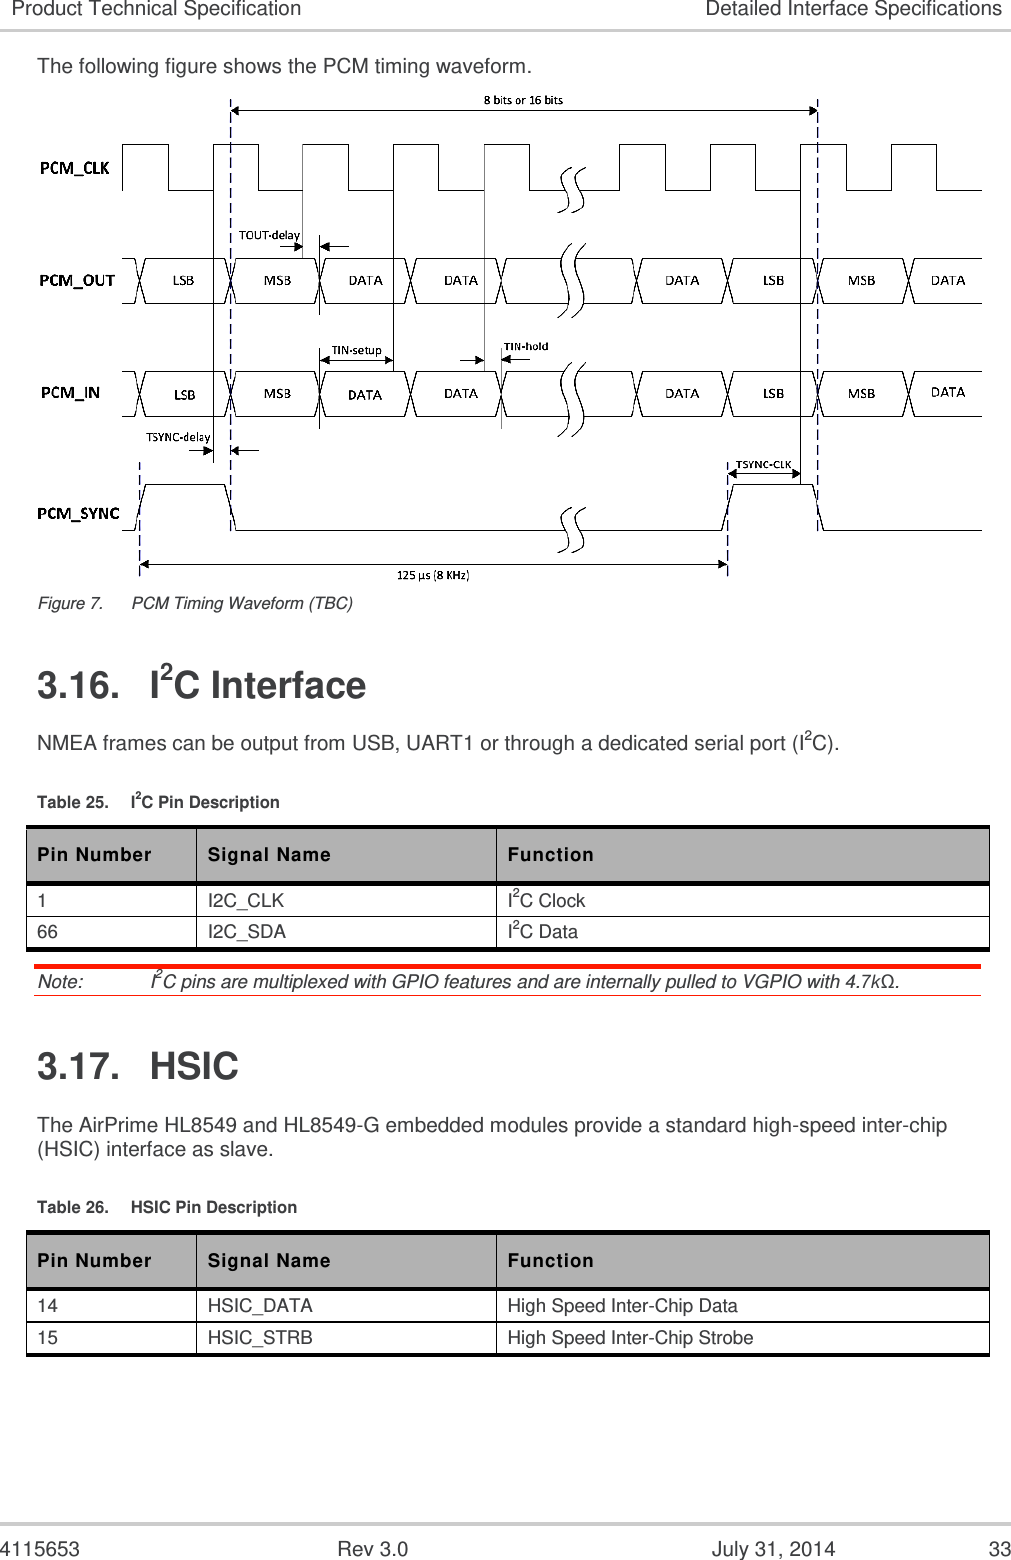  4115653  Rev 3.0  July 31, 2014  33 Product Technical Specification Detailed Interface Specifications The following figure shows the PCM timing waveform.  Figure 7.  PCM Timing Waveform (TBC) 3.16.  I2C Interface NMEA frames can be output from USB, UART1 or through a dedicated serial port (I2C). Table 25.  I2C Pin Description Pin Number Signal Name Function 1 I2C_CLK I2C Clock 66 I2C_SDA I2C Data Note:   I2C pins are multiplexed with GPIO features and are internally pulled to VGPIO with 4.7kΩ. 3.17.  HSIC The AirPrime HL8549 and HL8549-G embedded modules provide a standard high-speed inter-chip (HSIC) interface as slave. Table 26.  HSIC Pin Description Pin Number Signal Name Function 14 HSIC_DATA High Speed Inter-Chip Data  15 HSIC_STRB High Speed Inter-Chip Strobe    